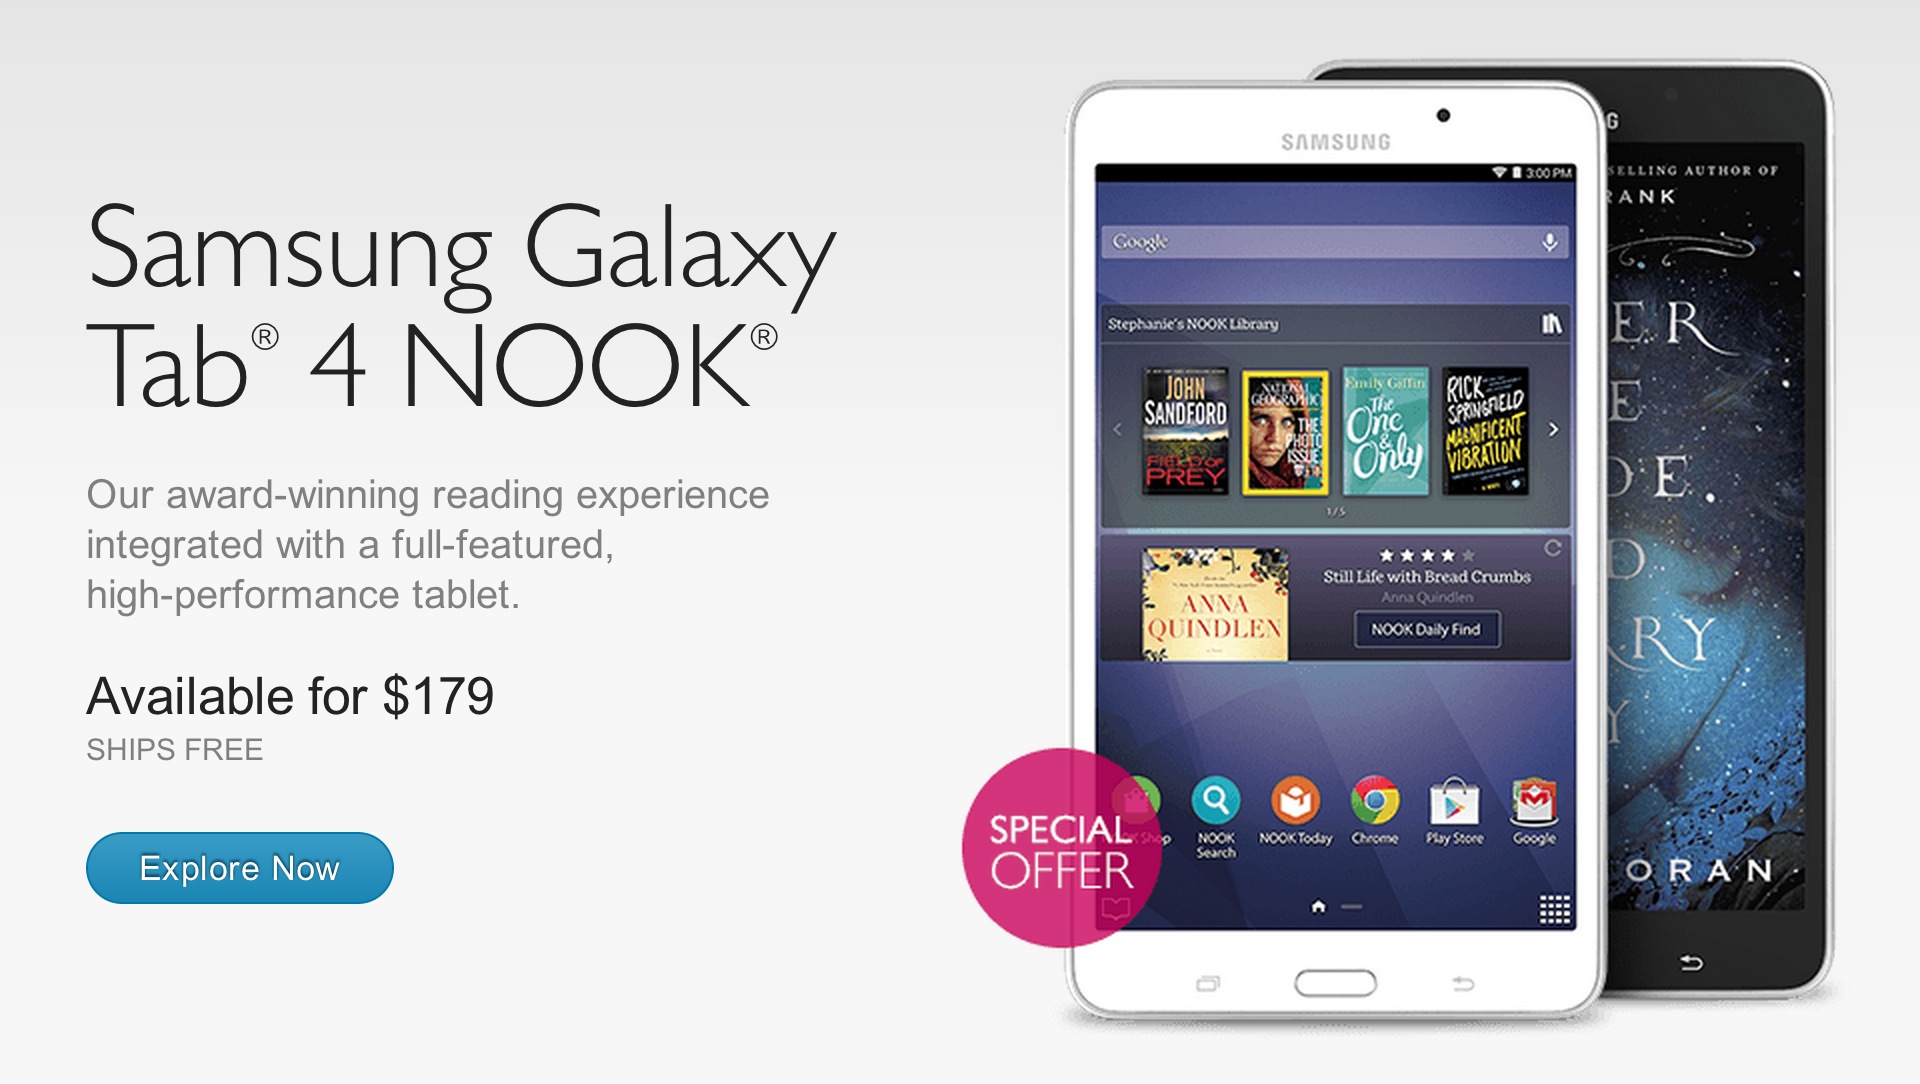 Samsung Galaxy Tab 4 Nook ships now for $179 (pictures)